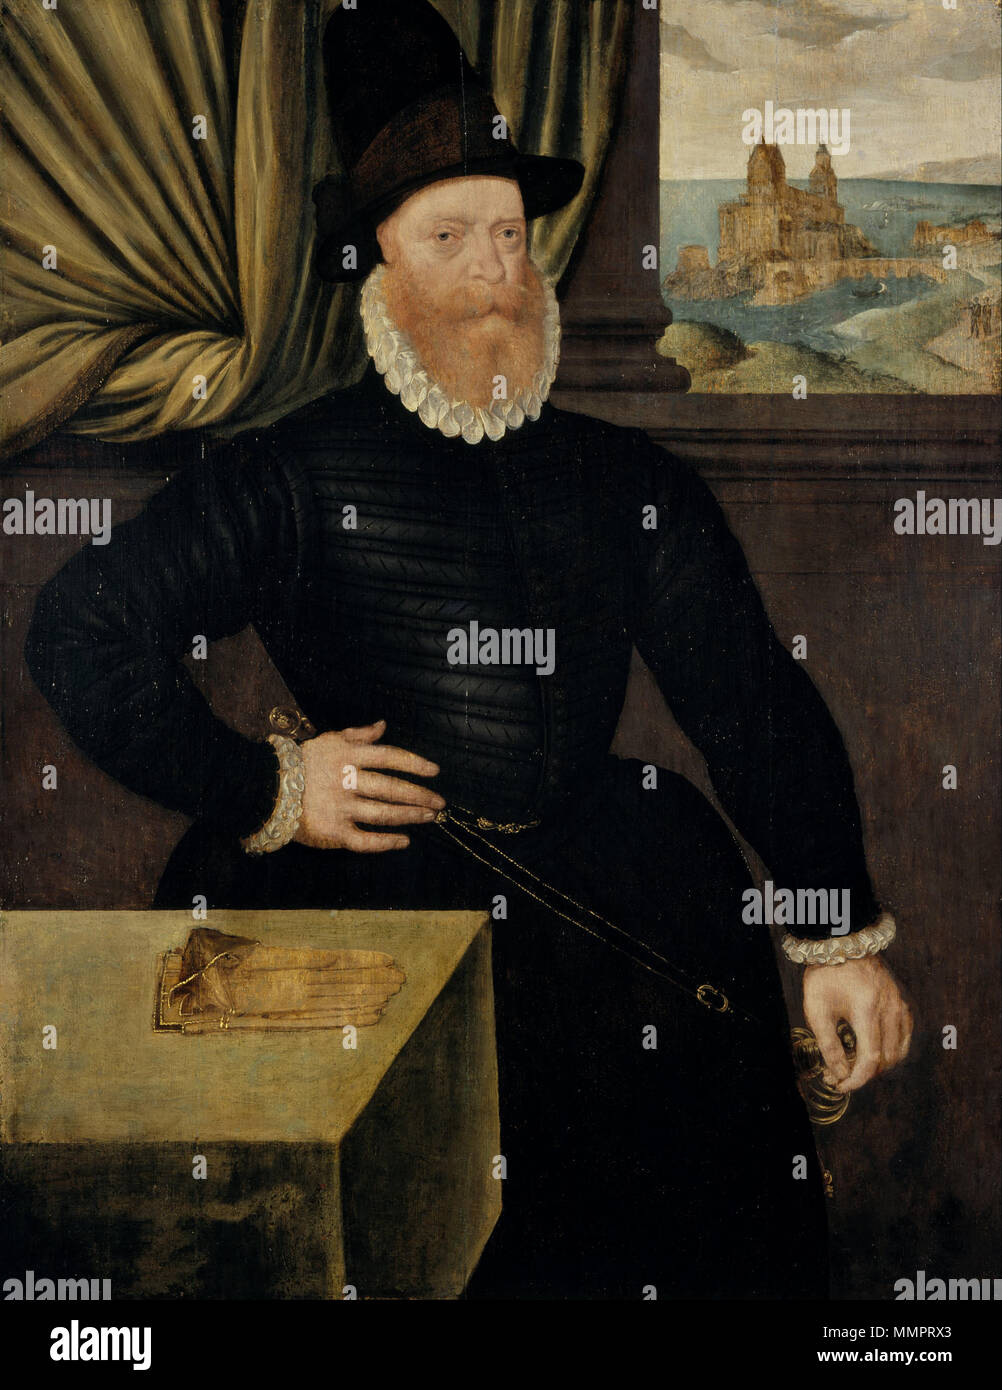 James Douglas, 4th Earl of Morton, about 1516 - 1581. Regent of Scotland. 1580. Attributed to Arnold Bronckorst - James Douglas, 4th Earl of Morton, about 1516 - 1581. Regent of Scotland - Google Art Project Stock Photo